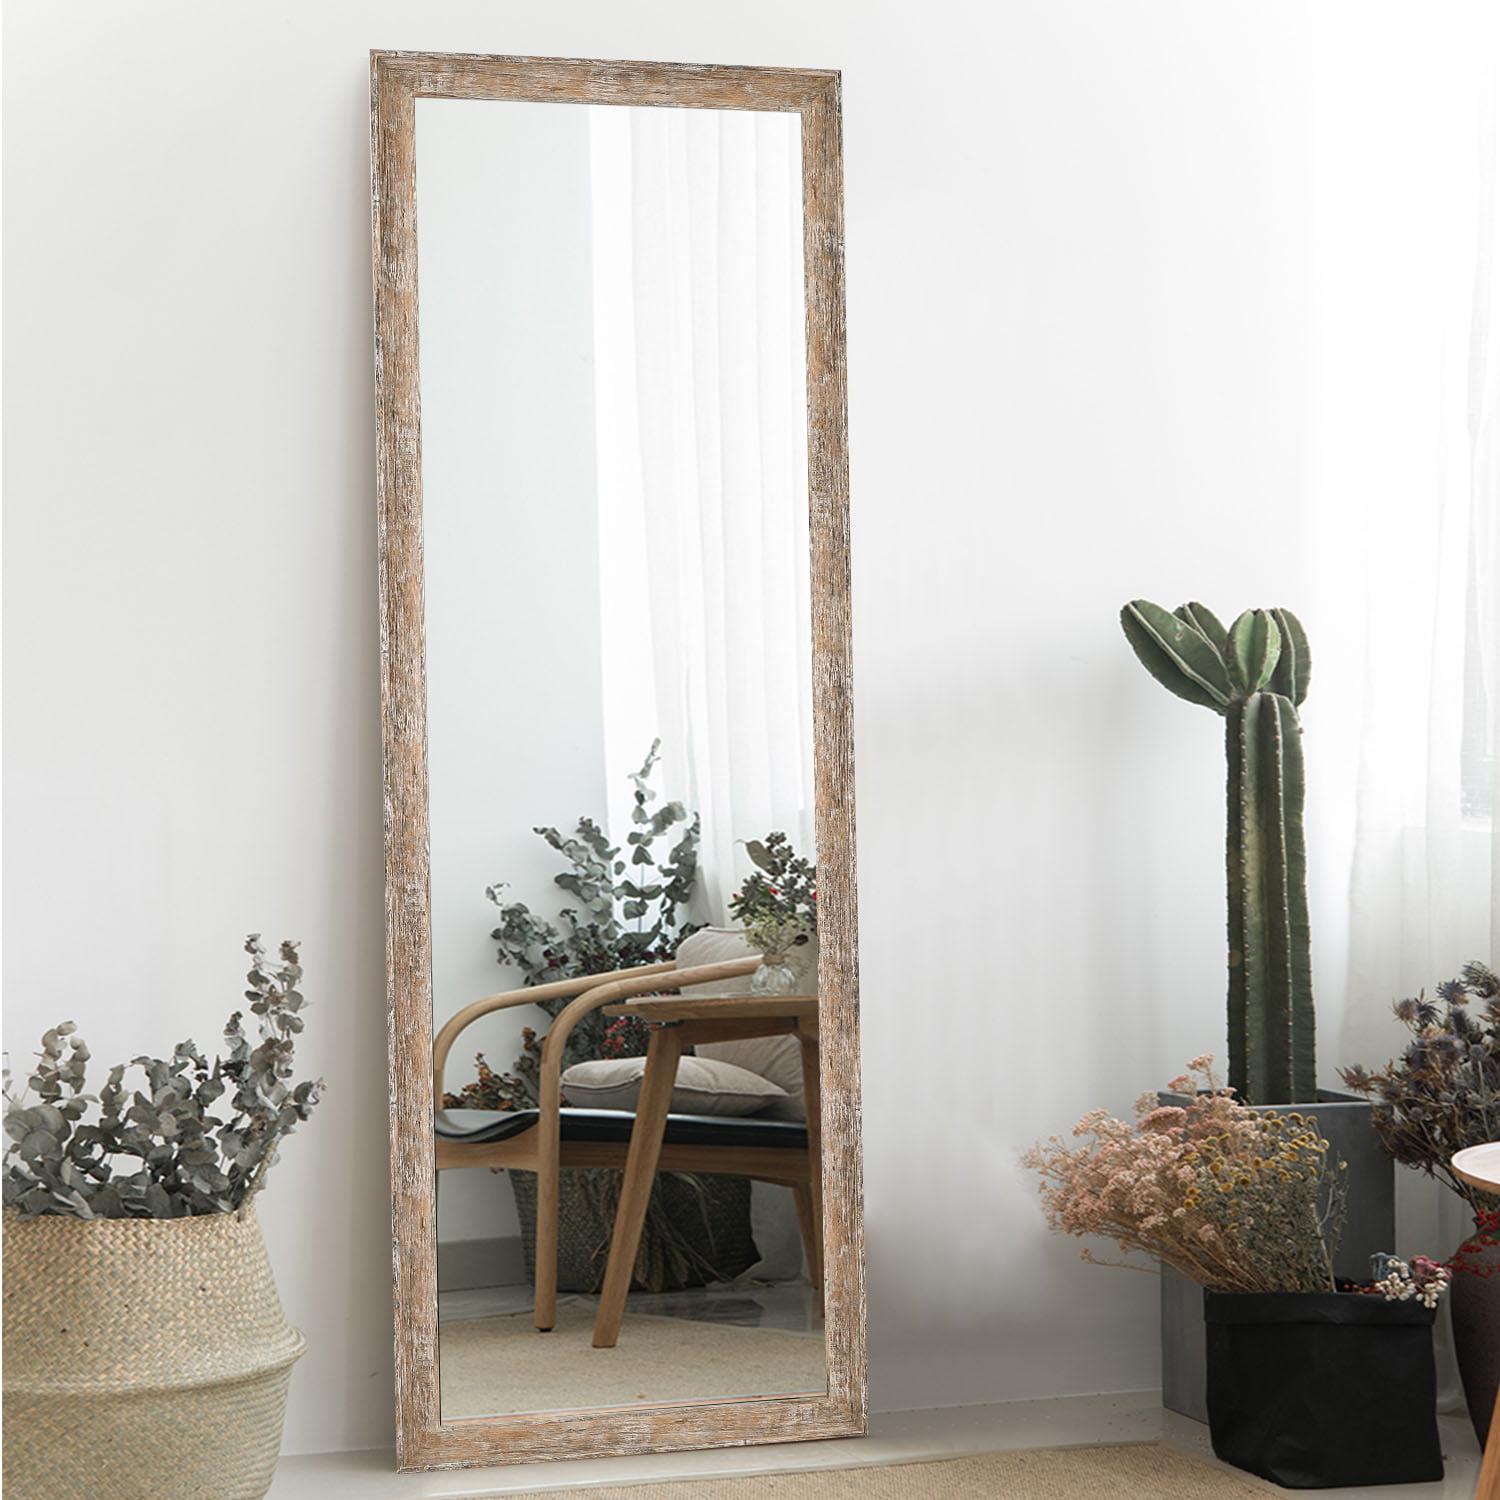 Floor Mirrors Full Length: Reflect Your Style With Elegance